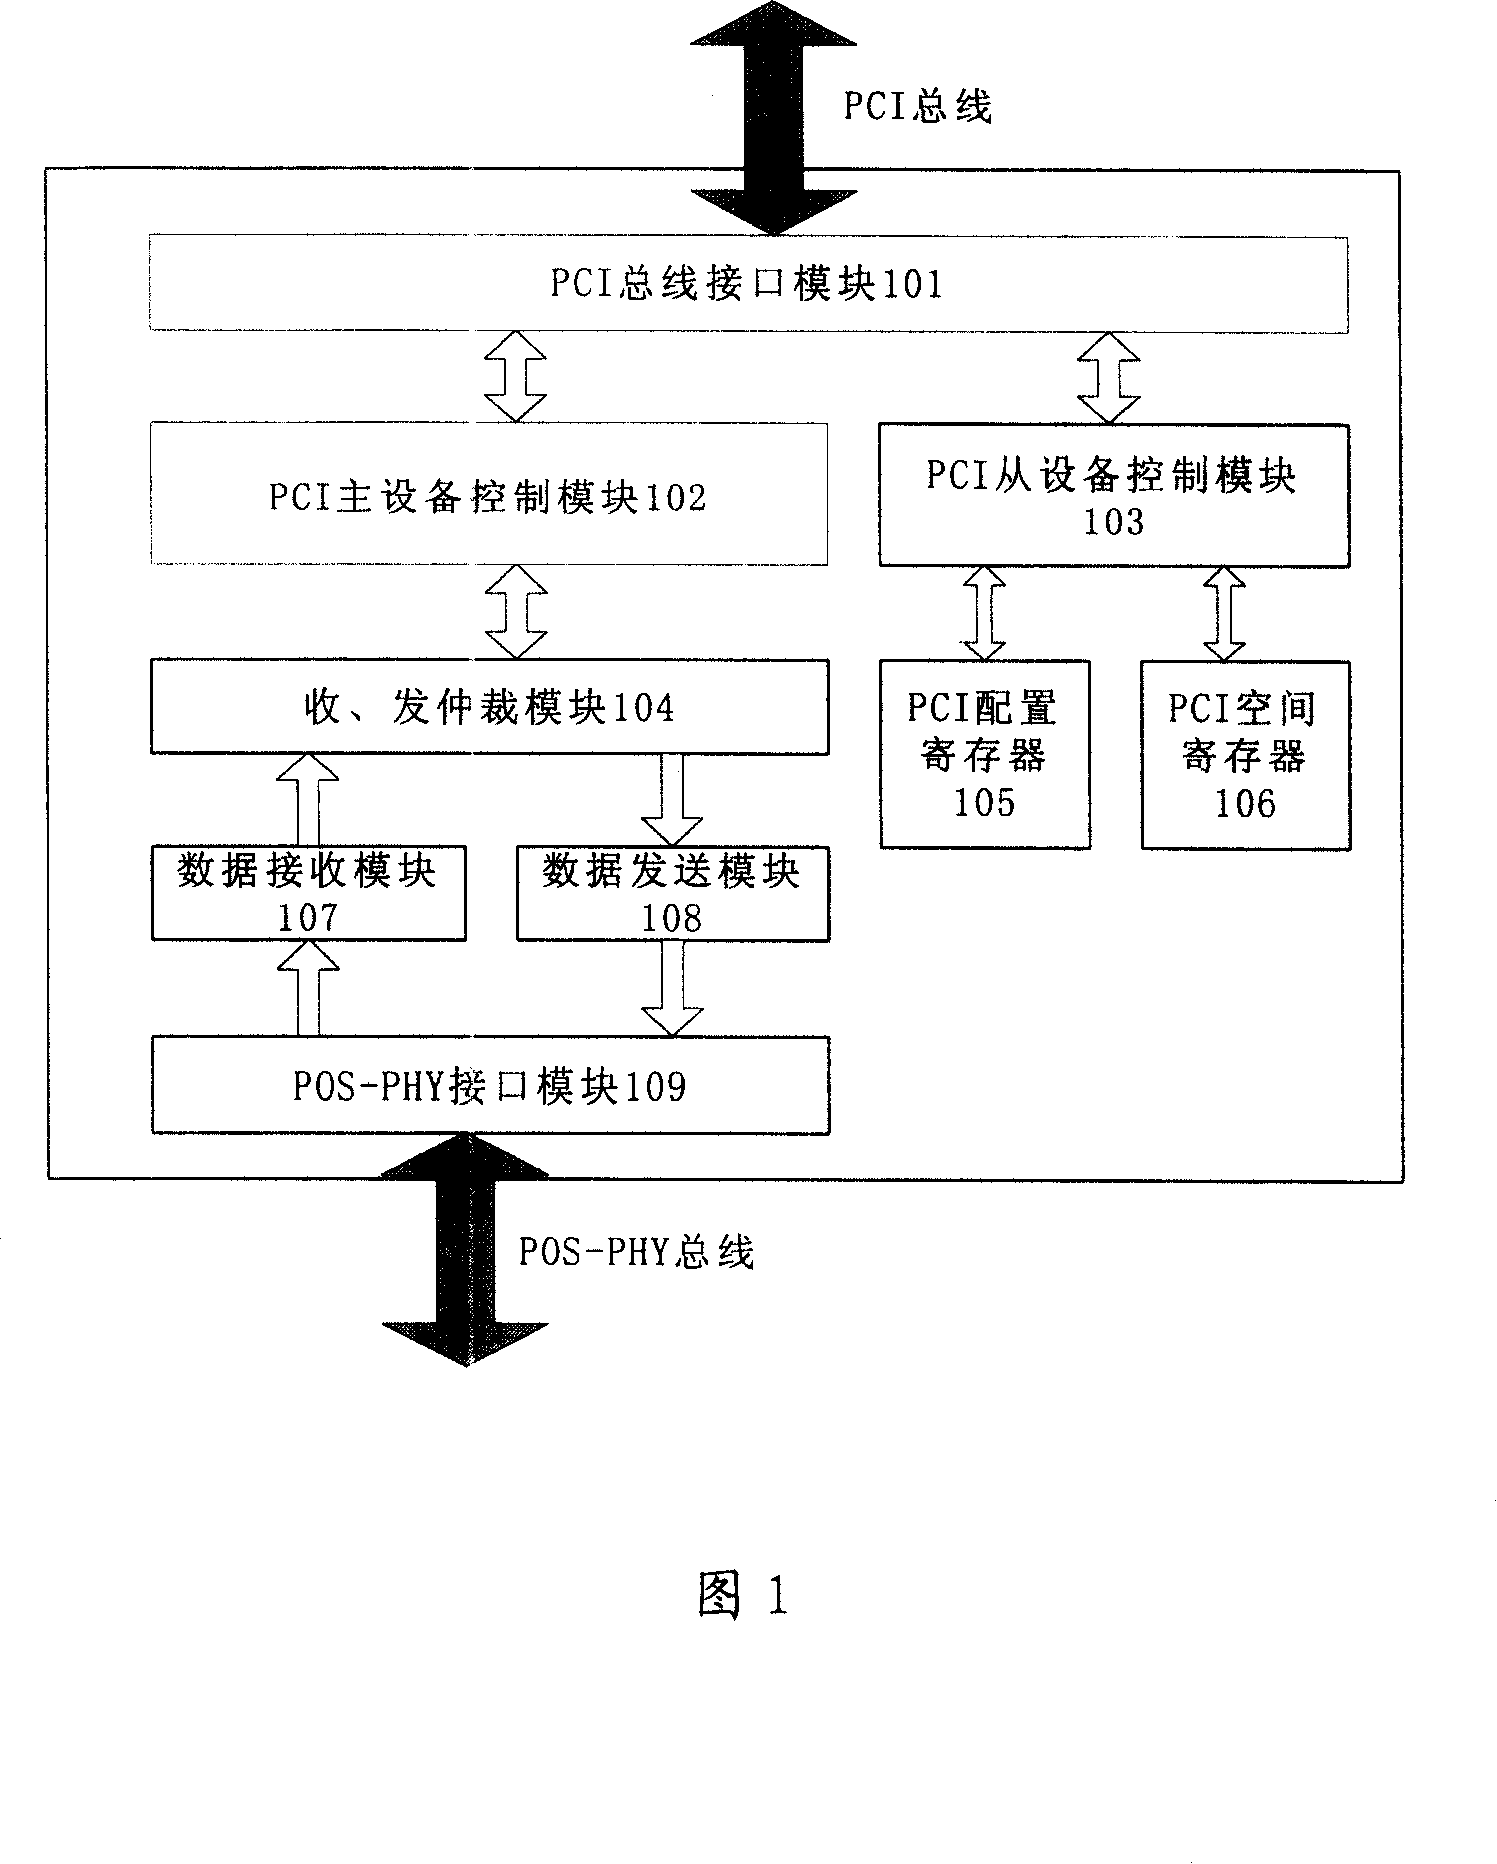 Device and method of data pocket retransmission between POS-PHY bus and PCI bus